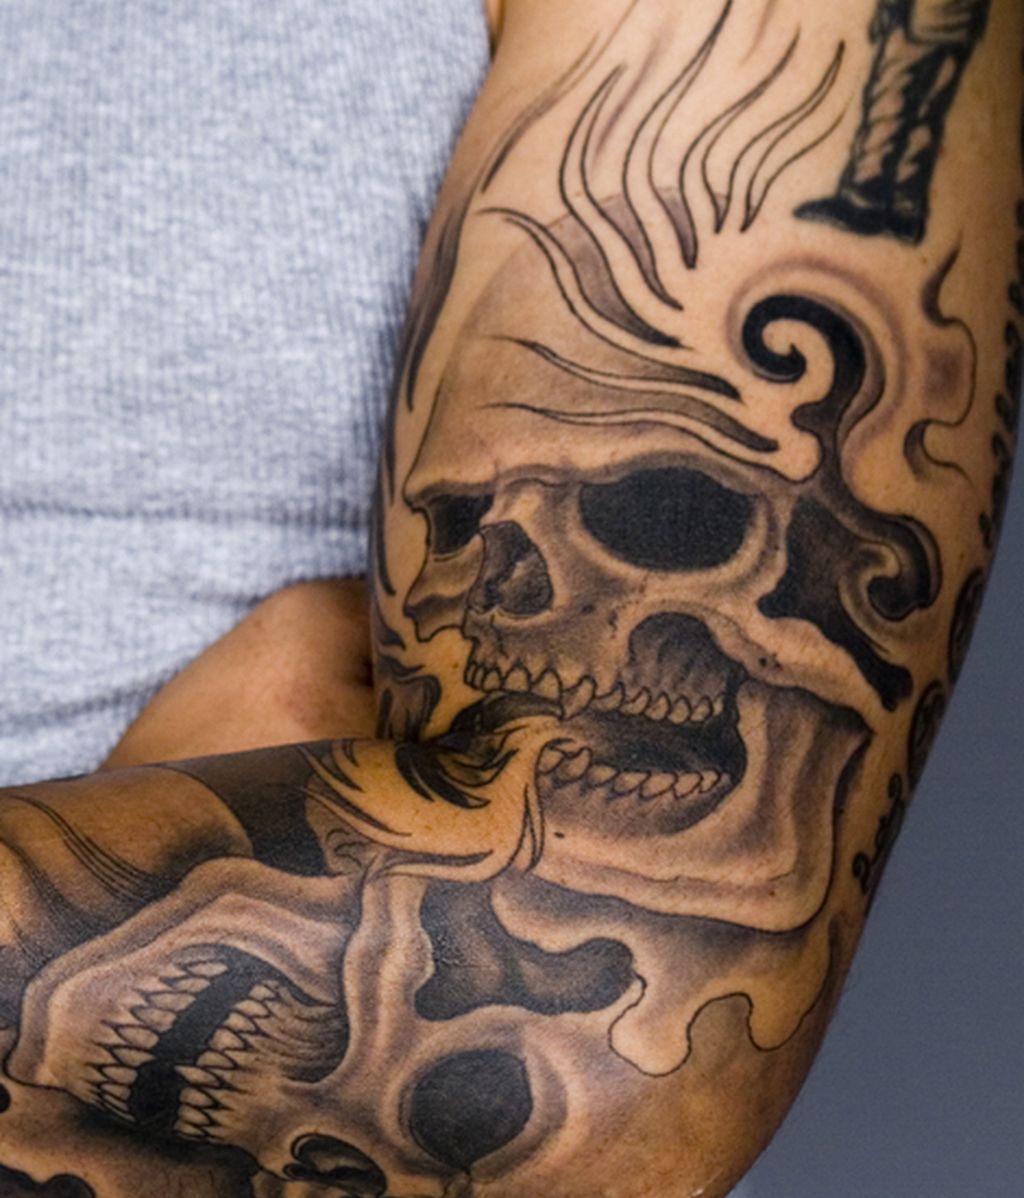 ‘Madrid Ink’ (Discovery Max)